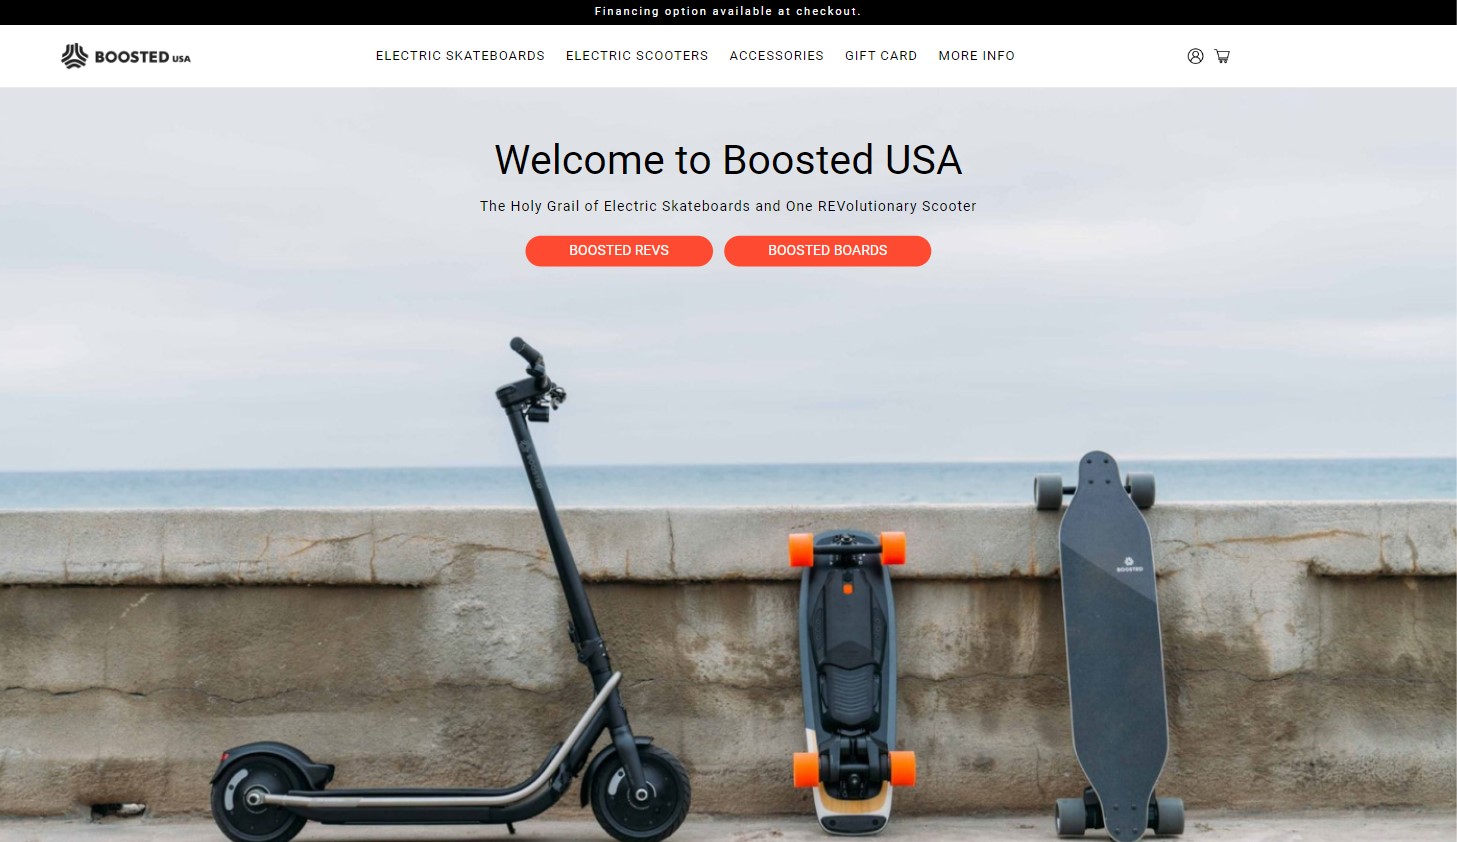 BOOSTED site image